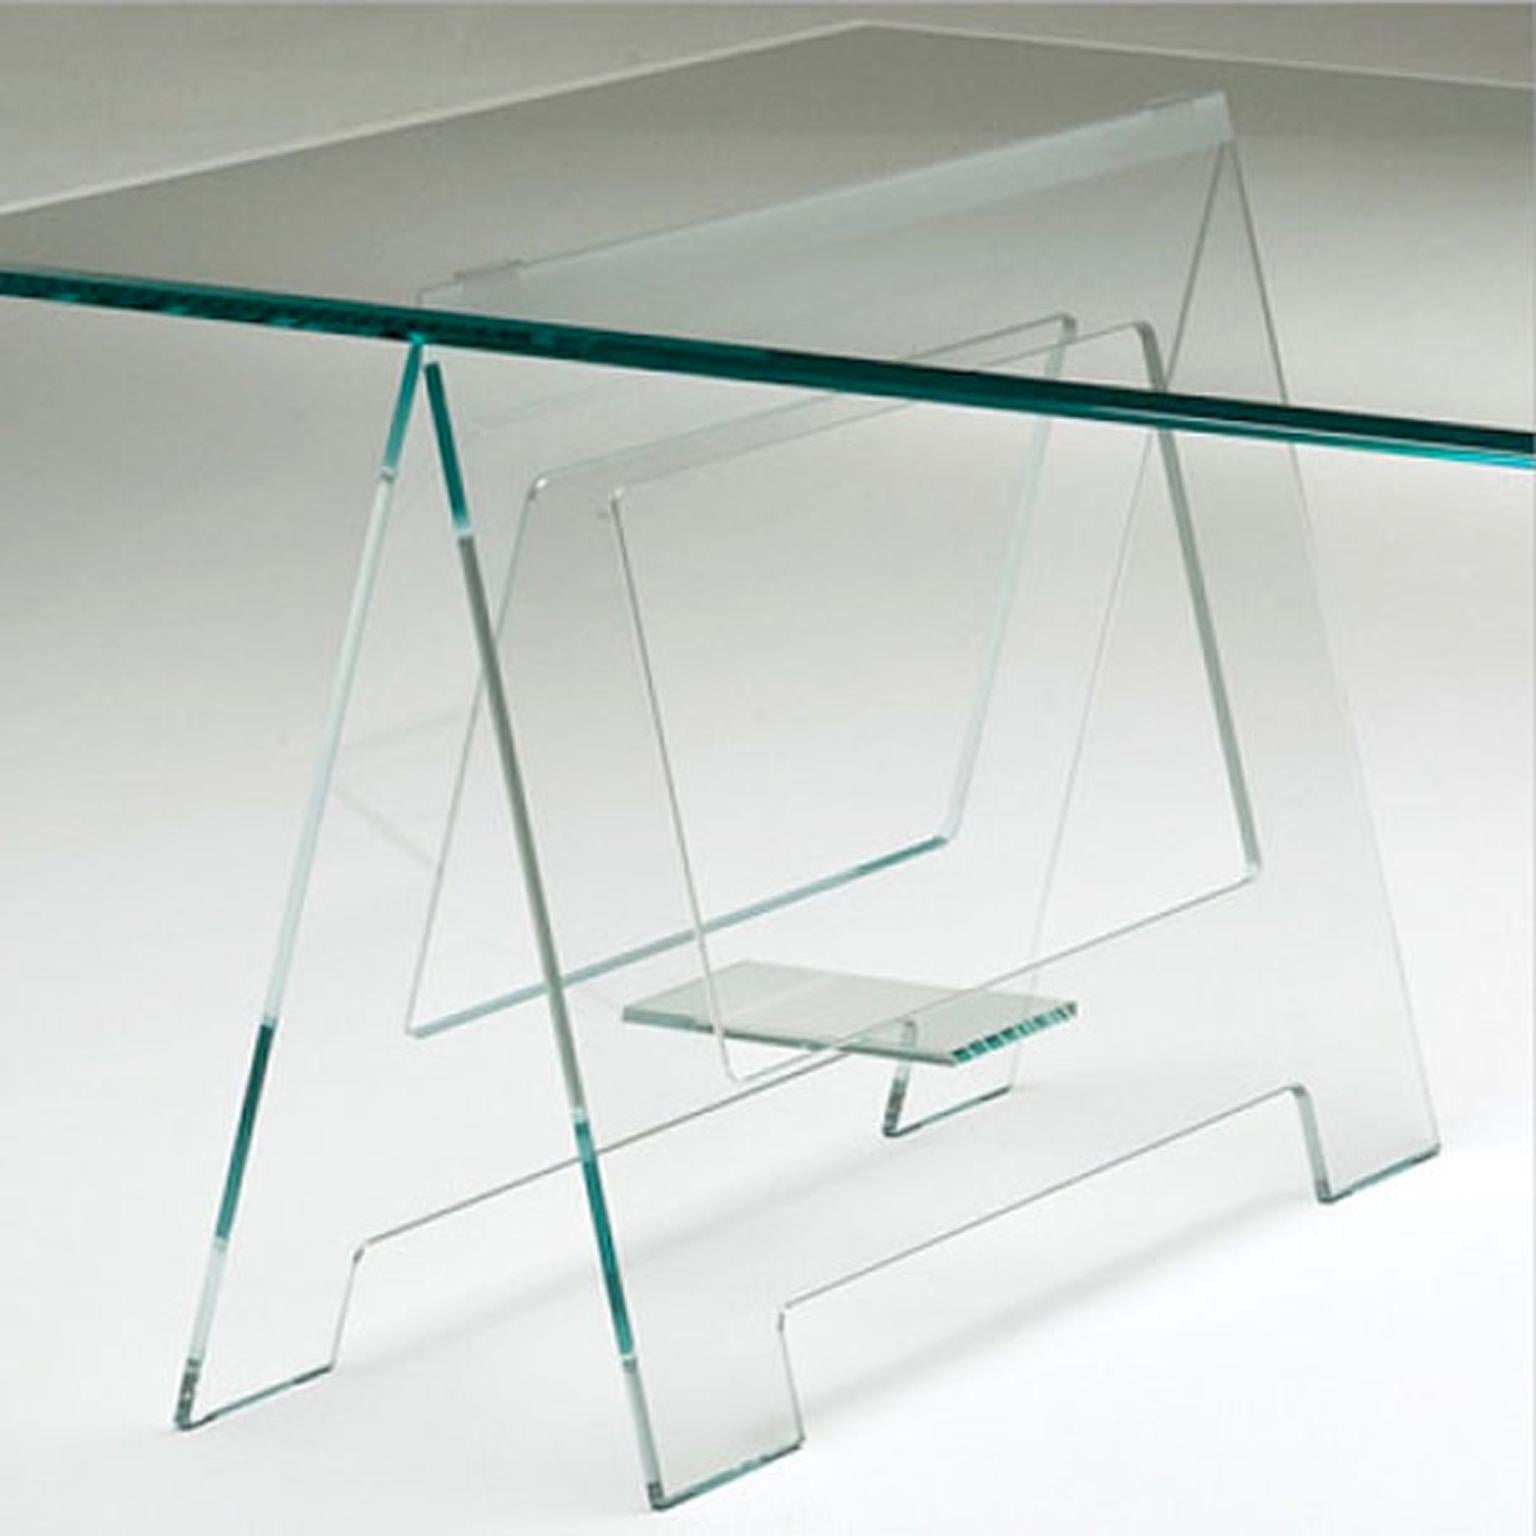 21st Century Italian Modern Design Crystal Desk or Dining Table with Easels For Sale 1